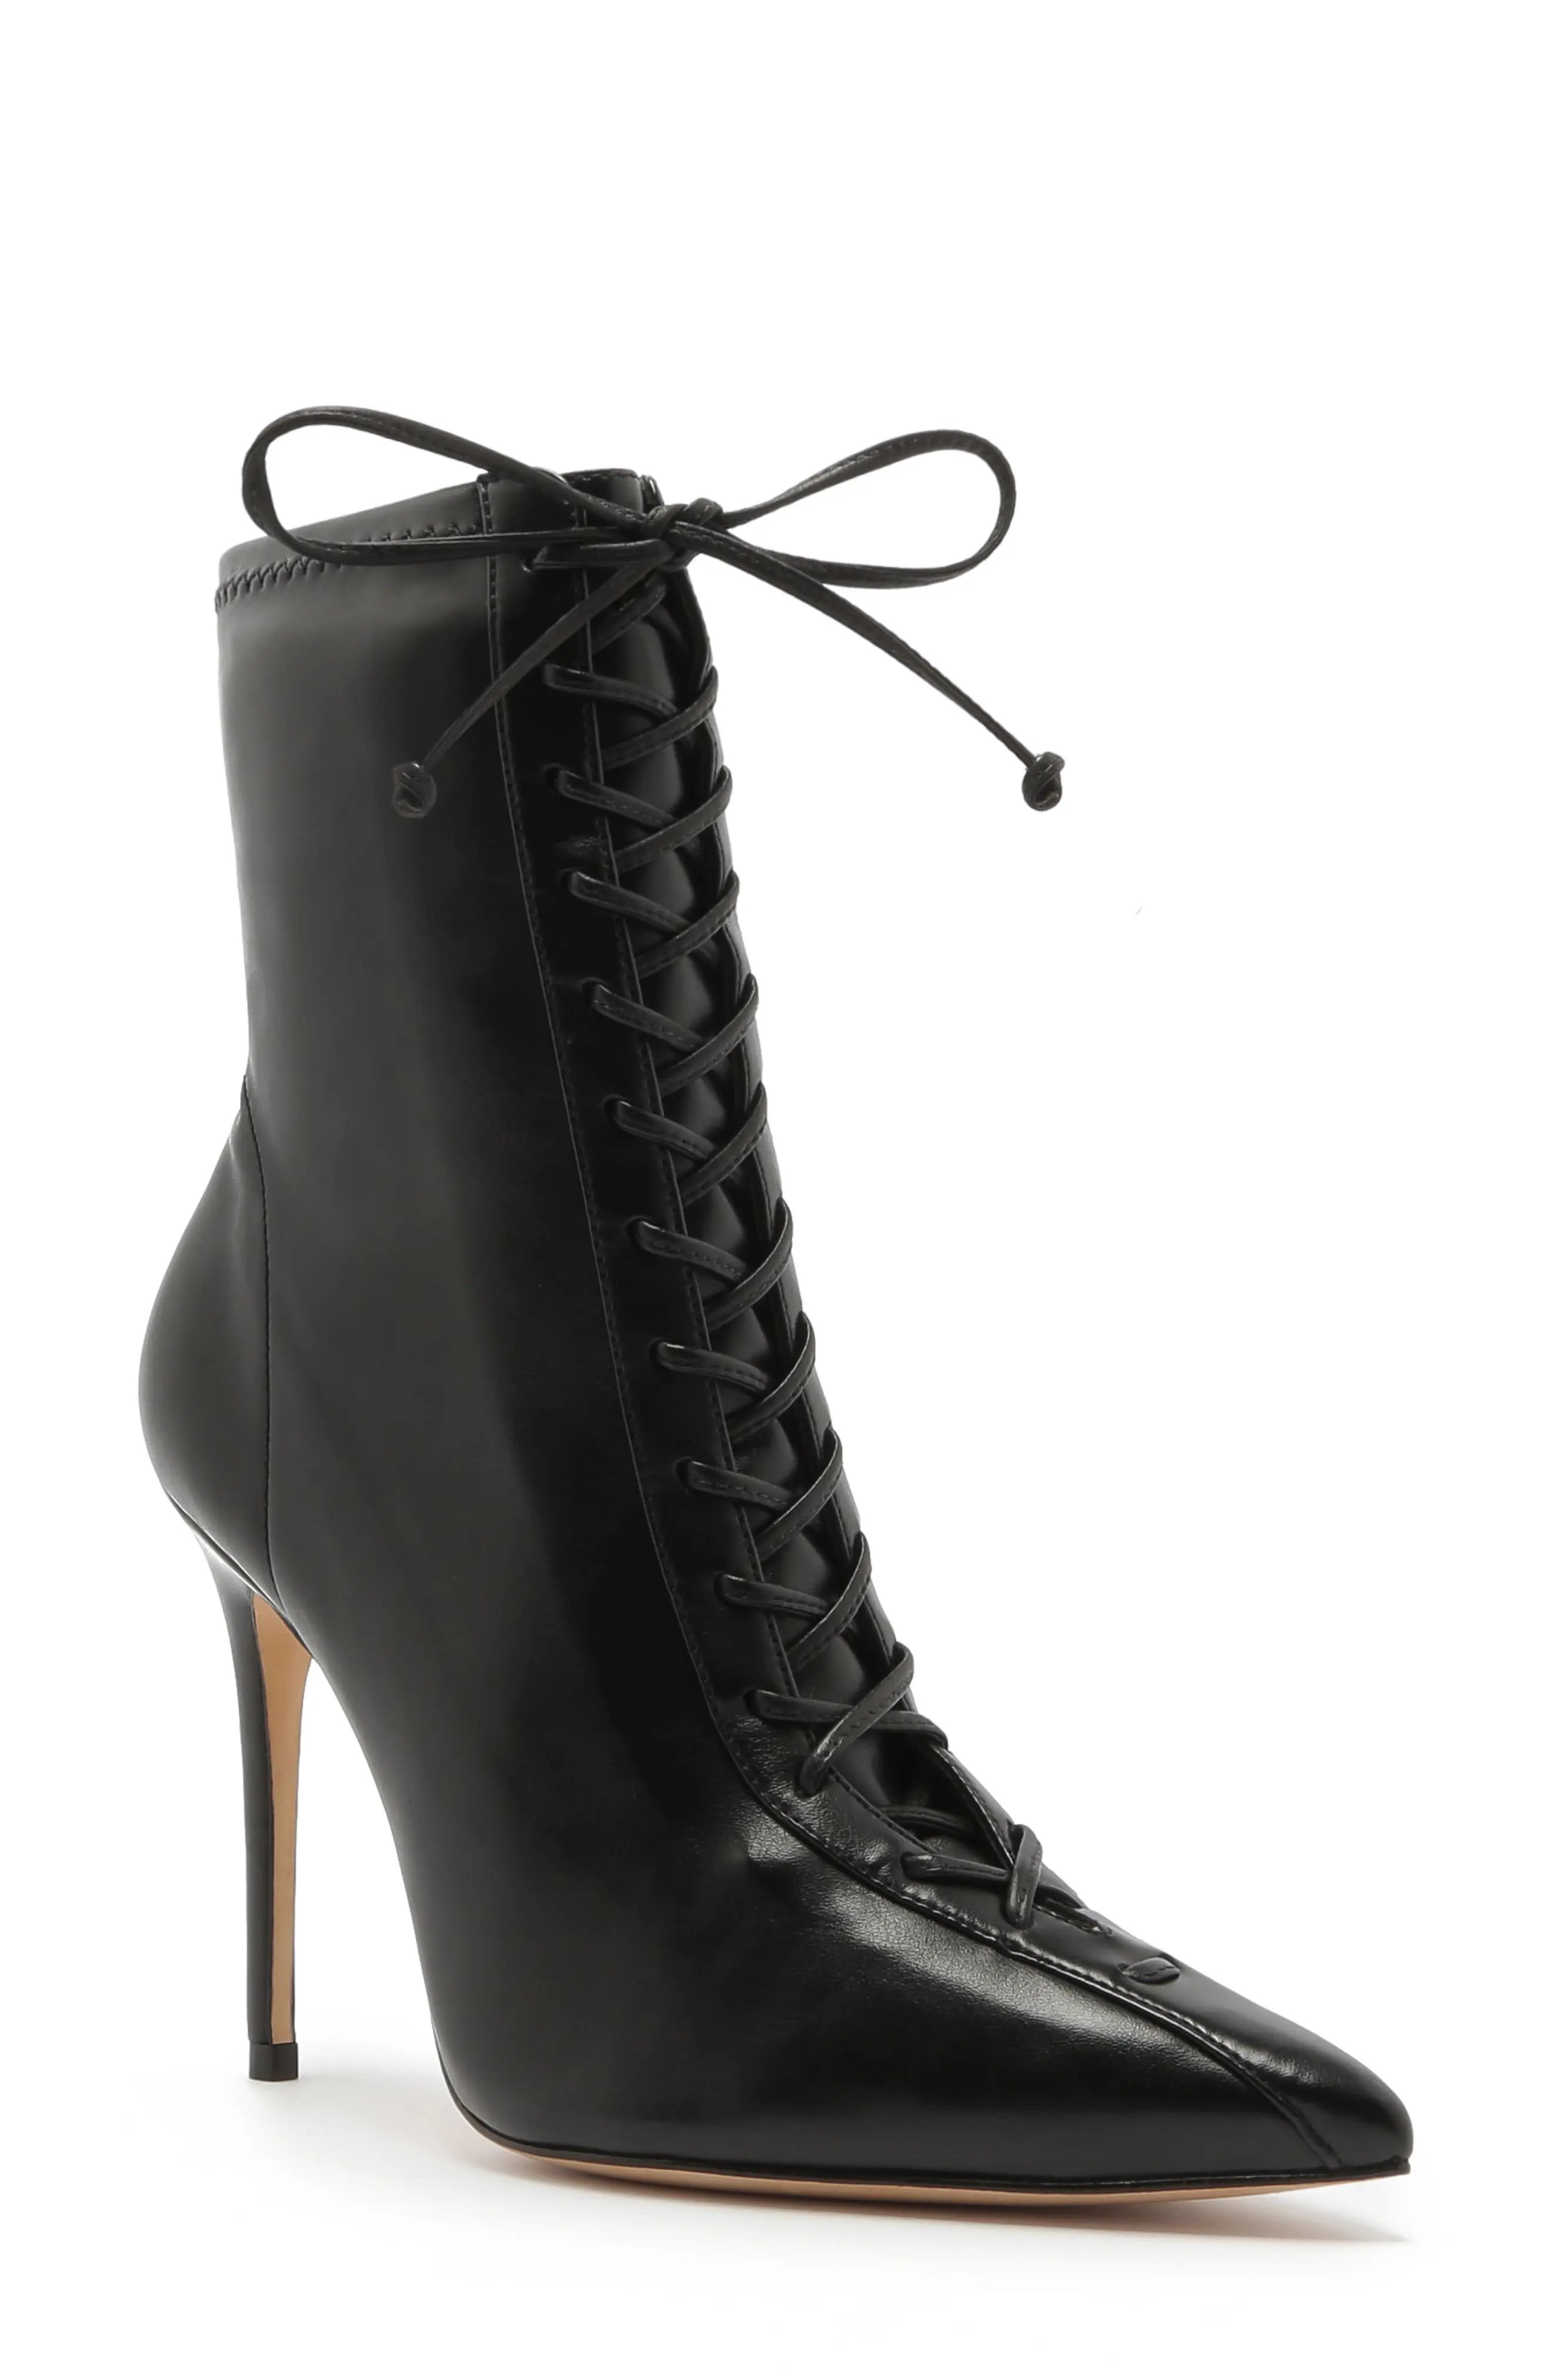 Schutz Tennie Pointed Toe Lace-Up Boot, Size 5 in Black Leather at Nordstrom | Nordstrom